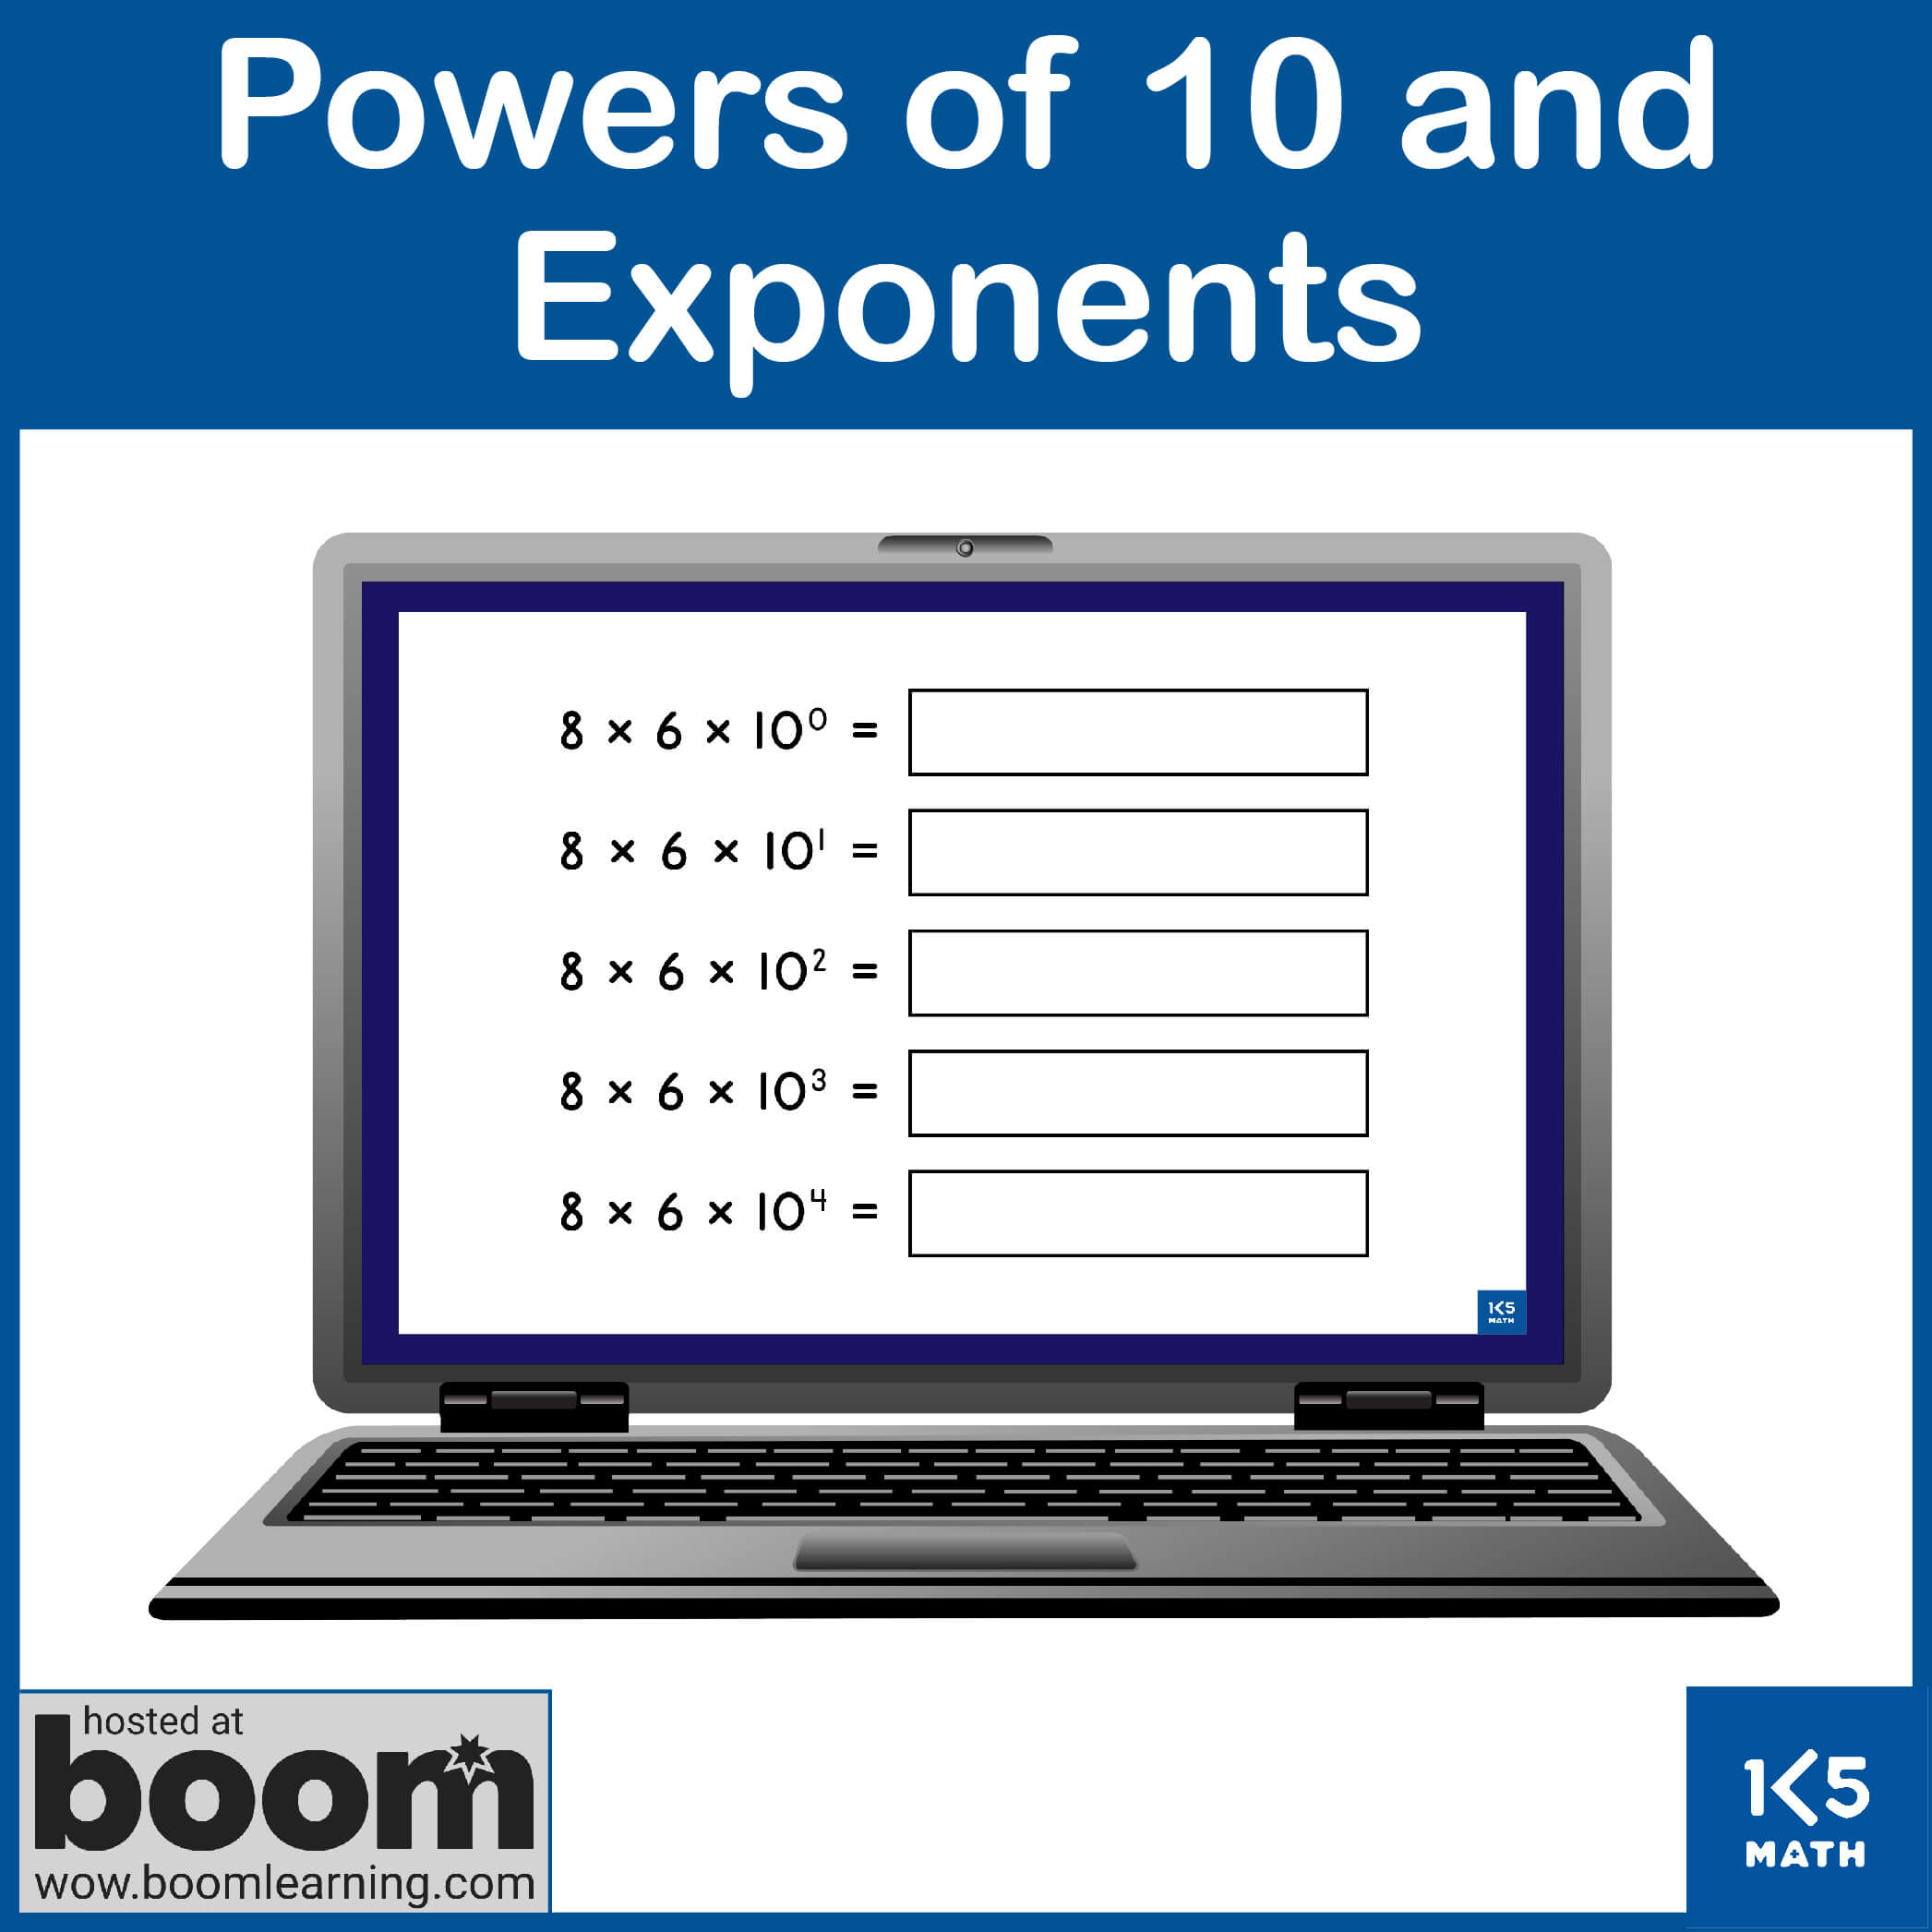 Boom Cards: Powers of 10 and Exponents